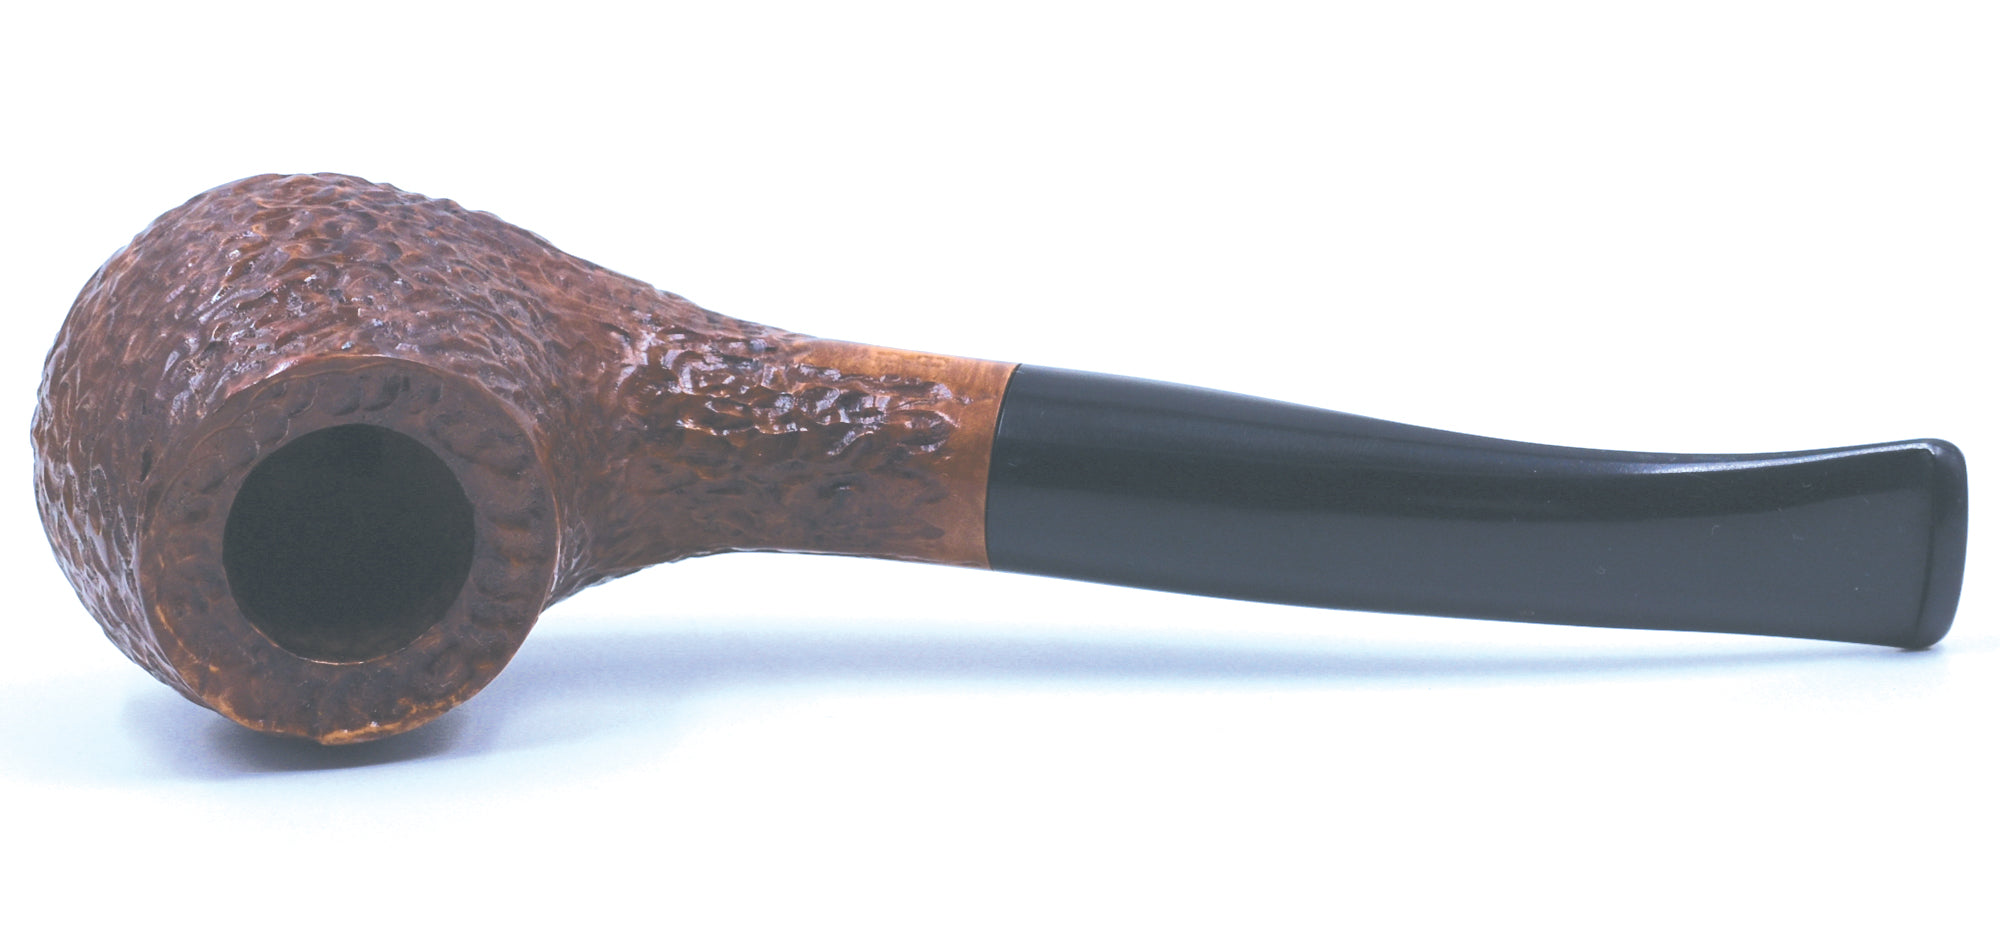 LEGENDEX® PUCCINI* 6 MM Filtered Briar Smoking Pipe Made In Italy 01-08-213